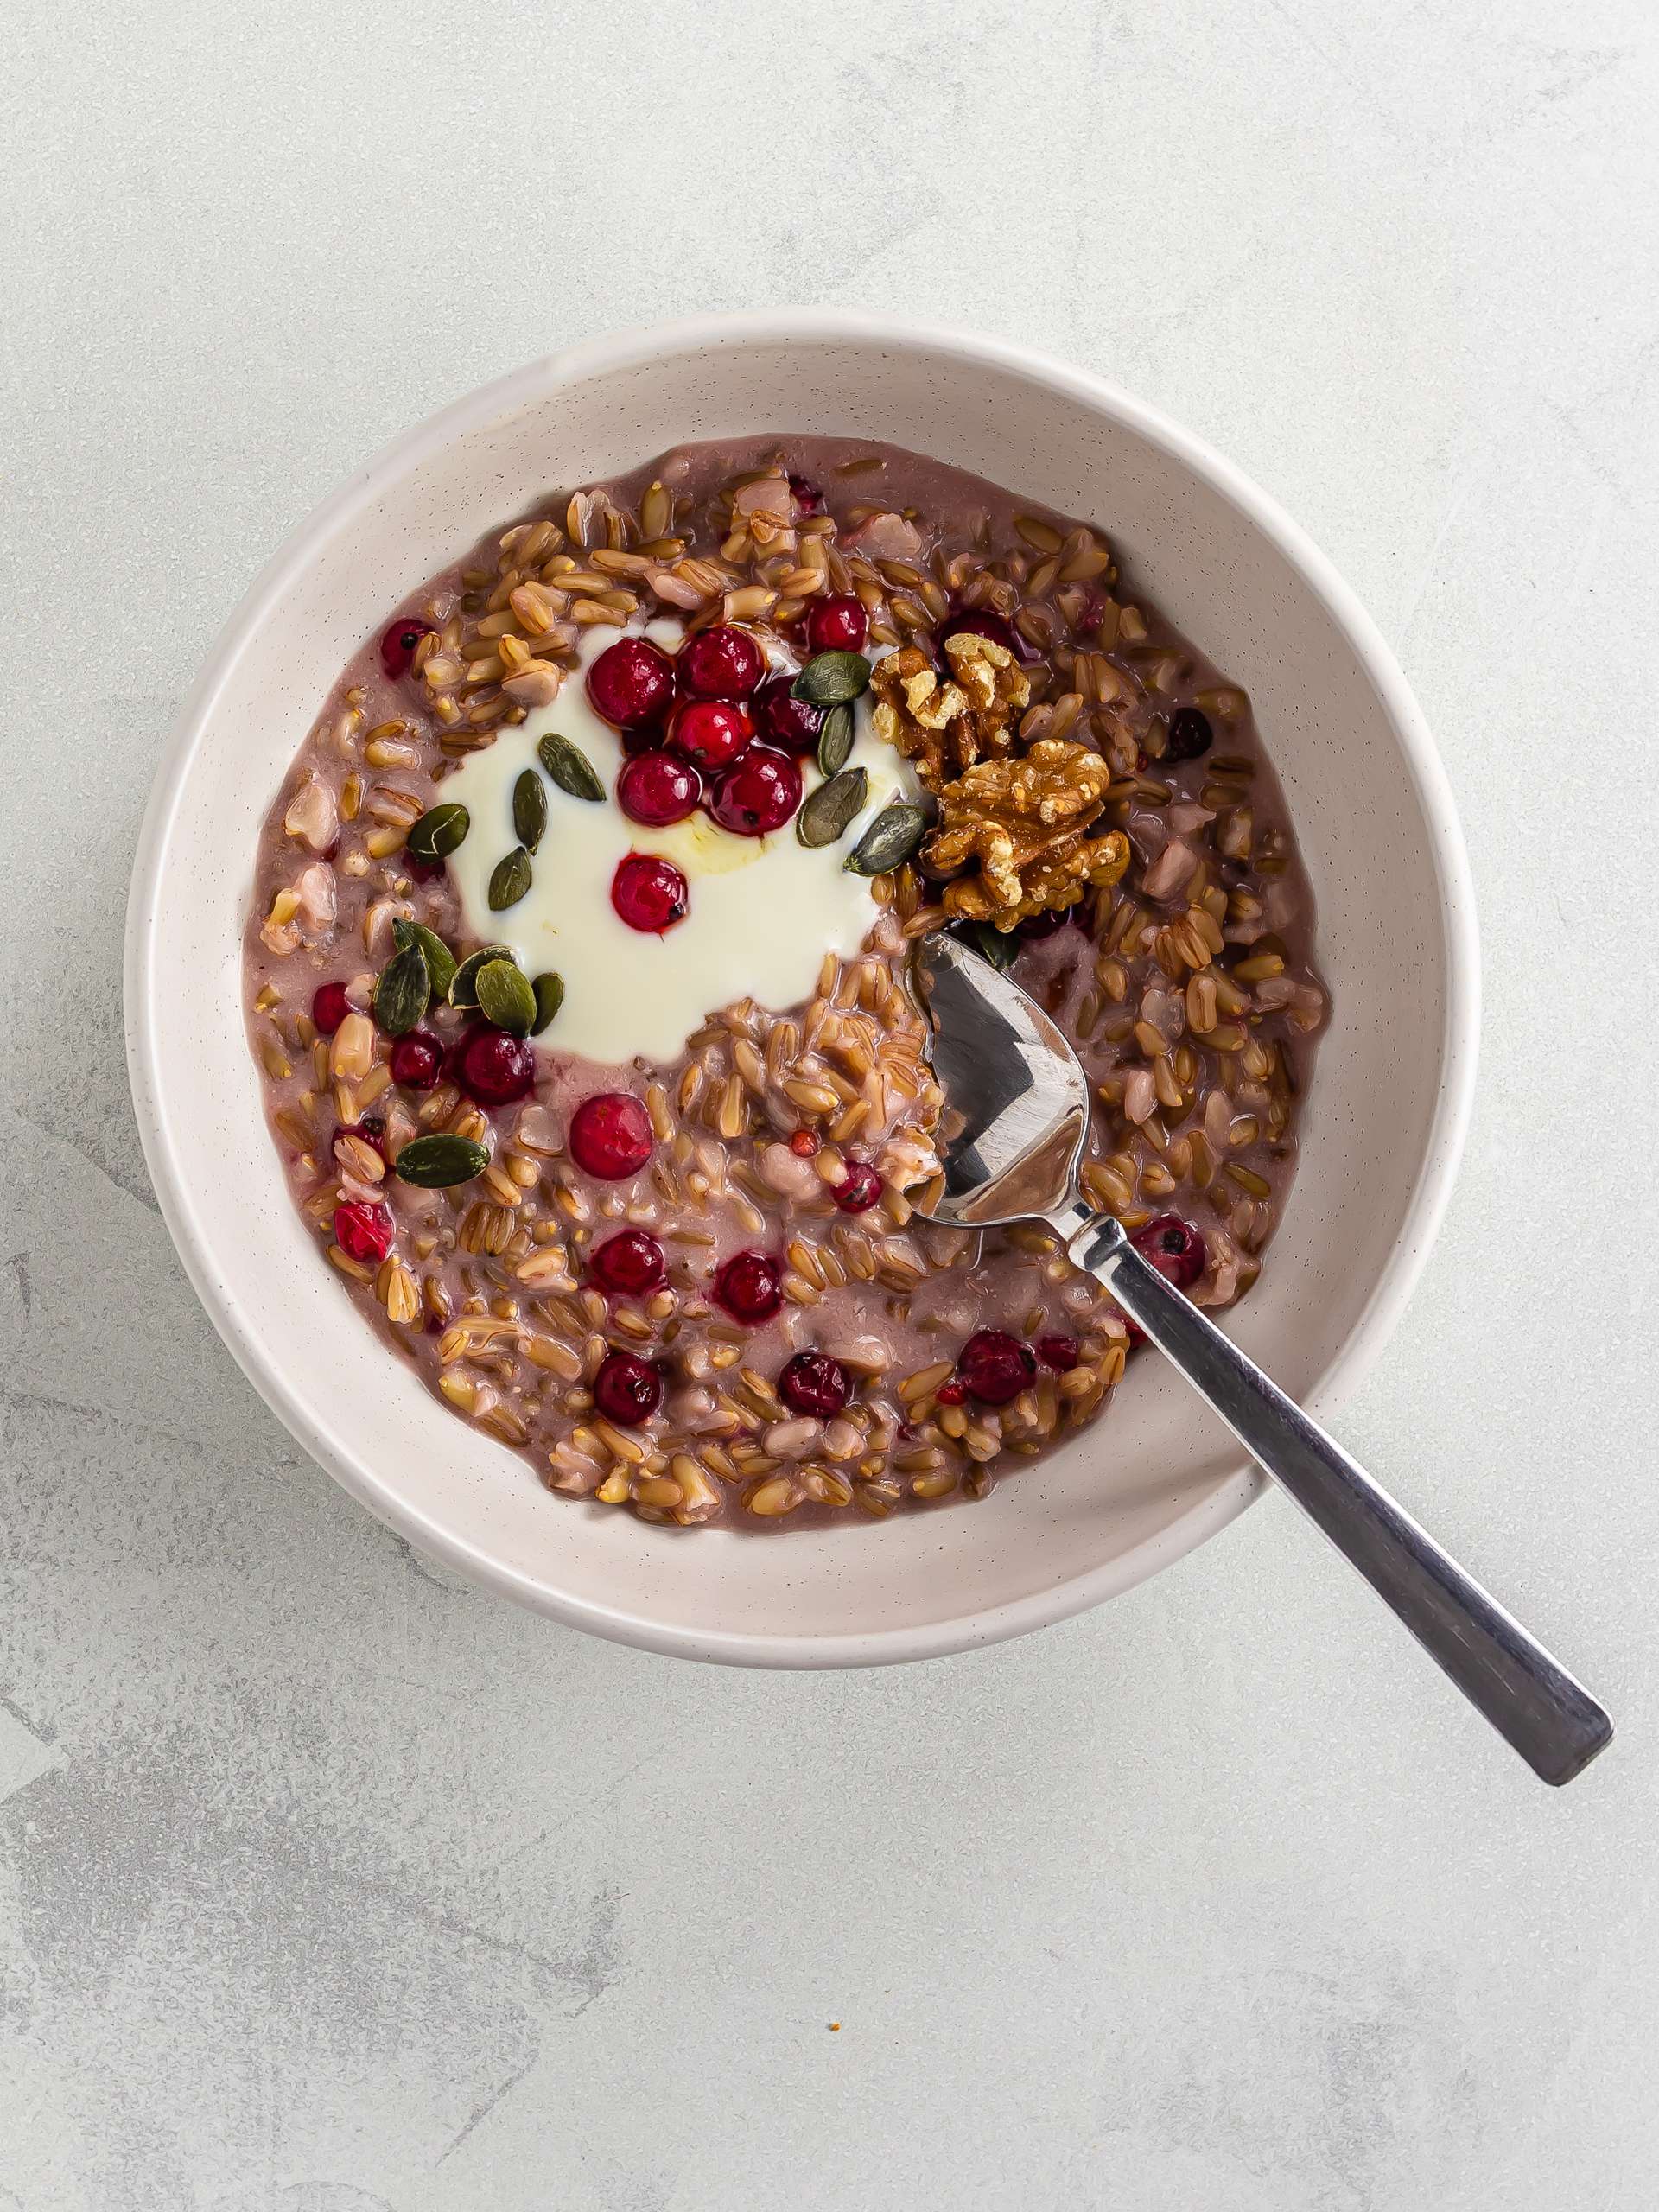 overnight oats groats hot cereal bowl with red currants